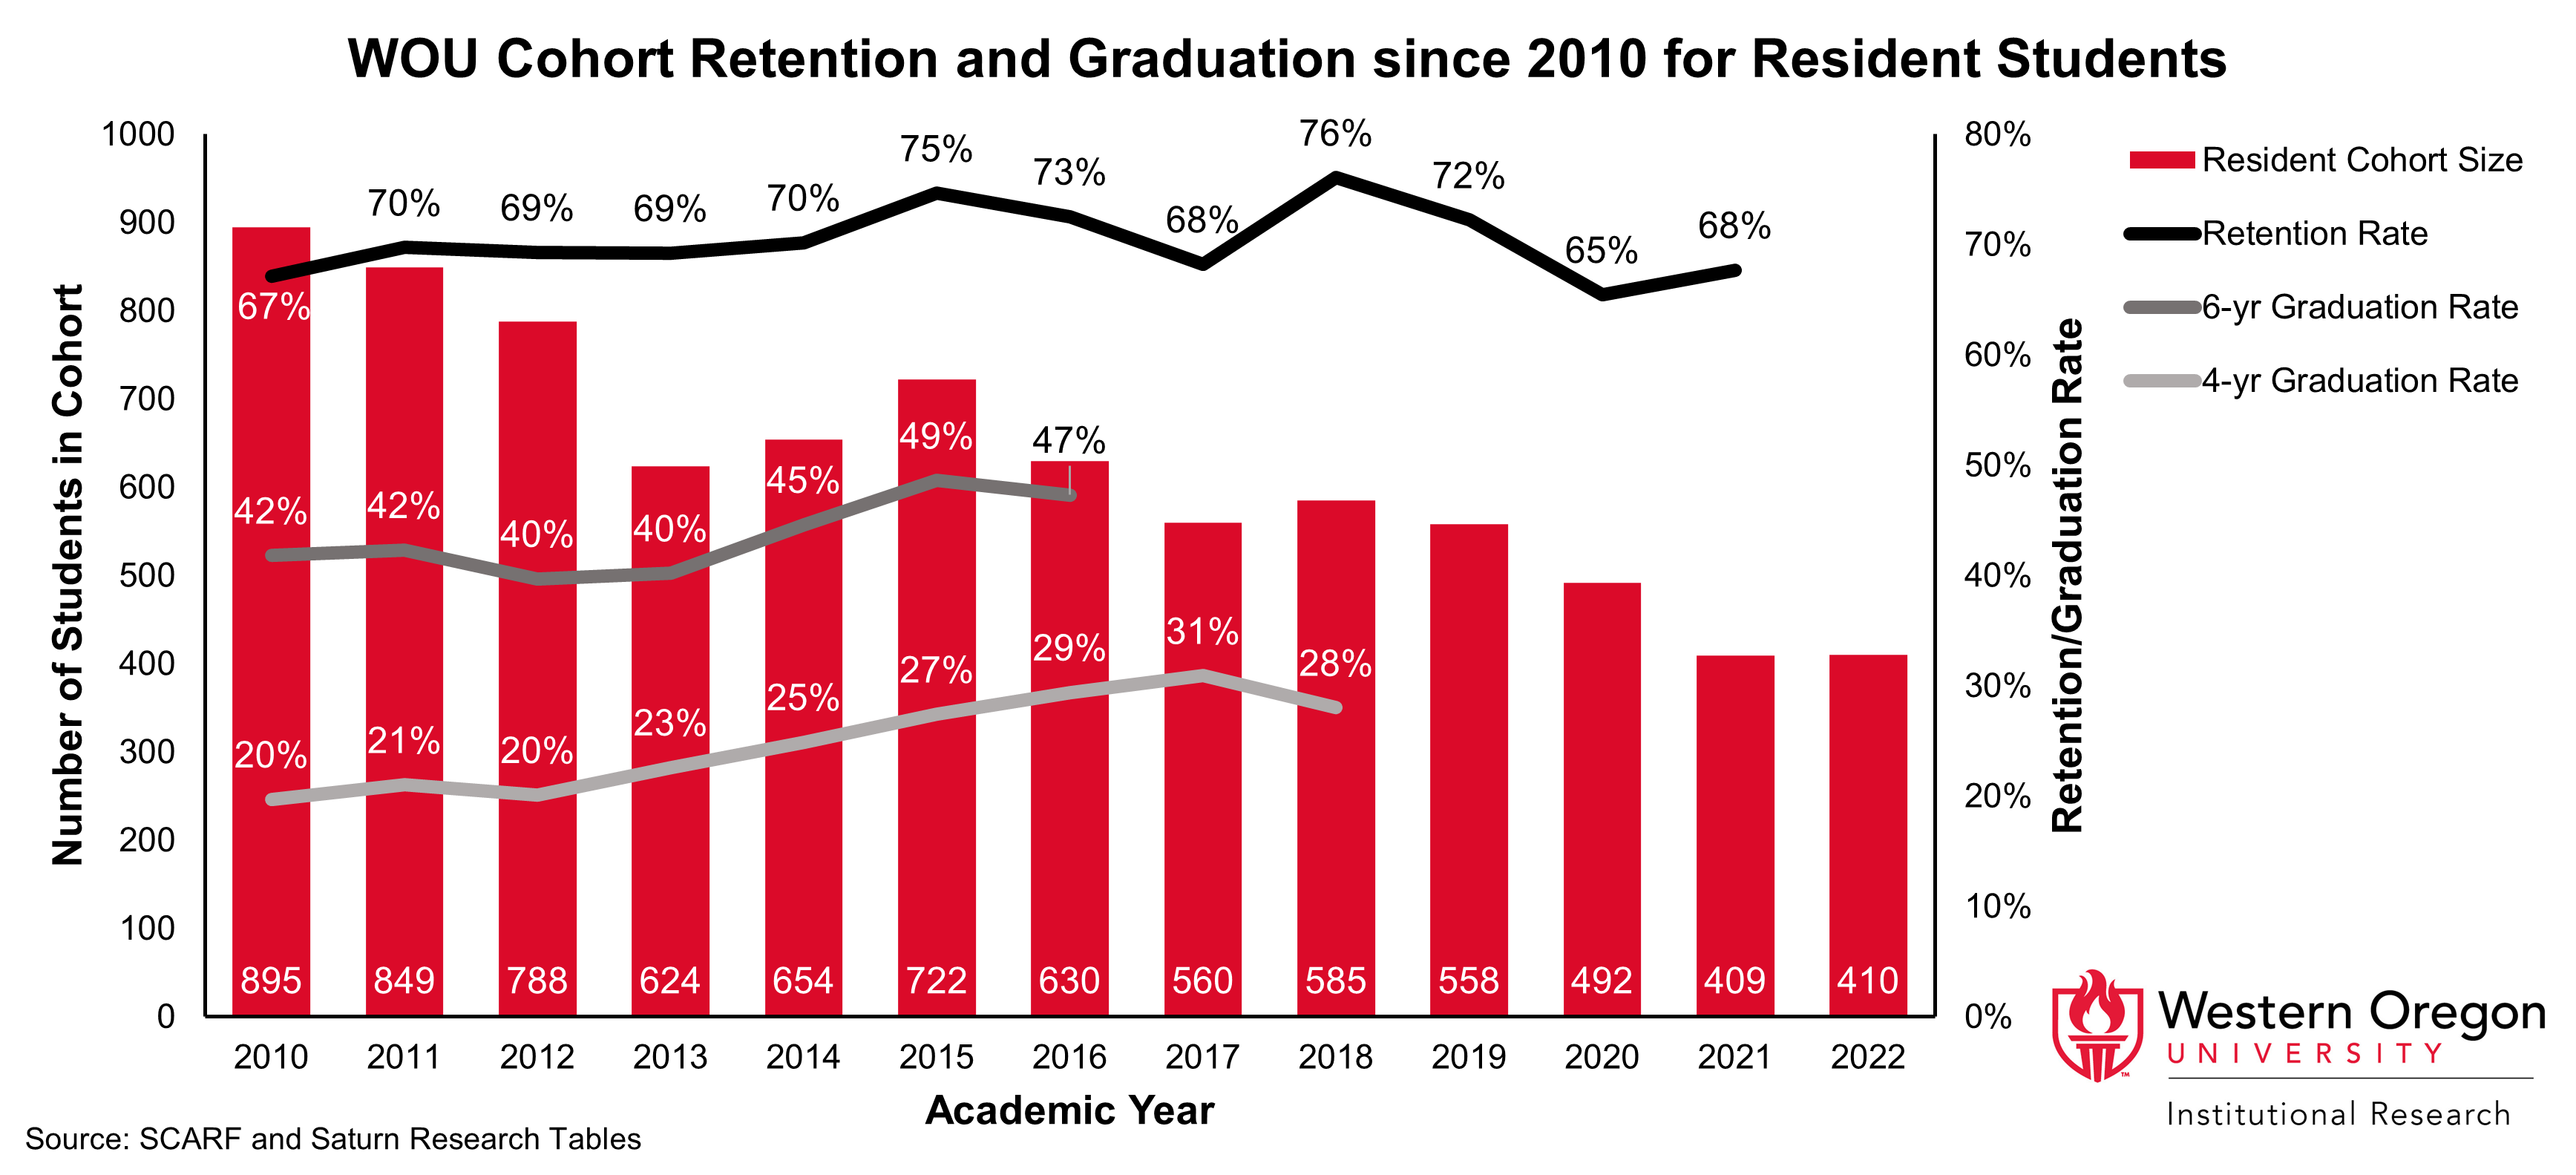 Bar and line graph of retention and 4- and 6-year graduation rates since 2010 for WOU students that have residency status, showing that graduation rates have been steadily increasing while retention rates have remained largely stable